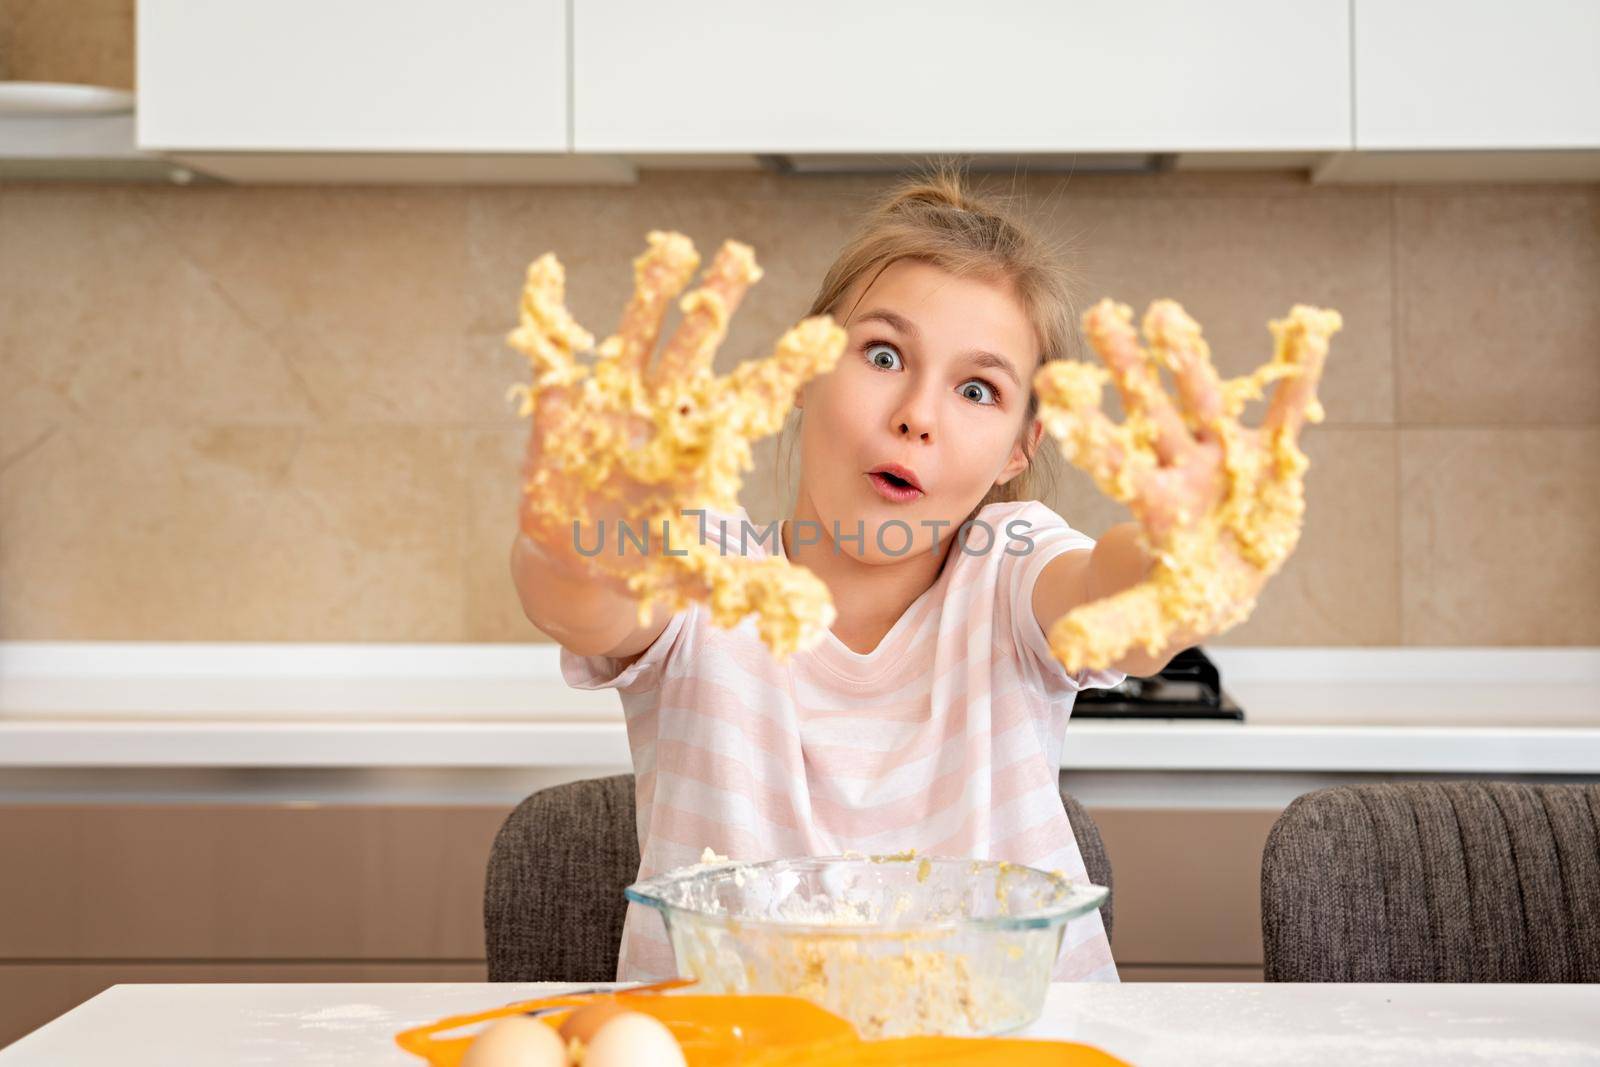 Teenage girl shows dirty hands in dough having fun in kitchen by Mariakray